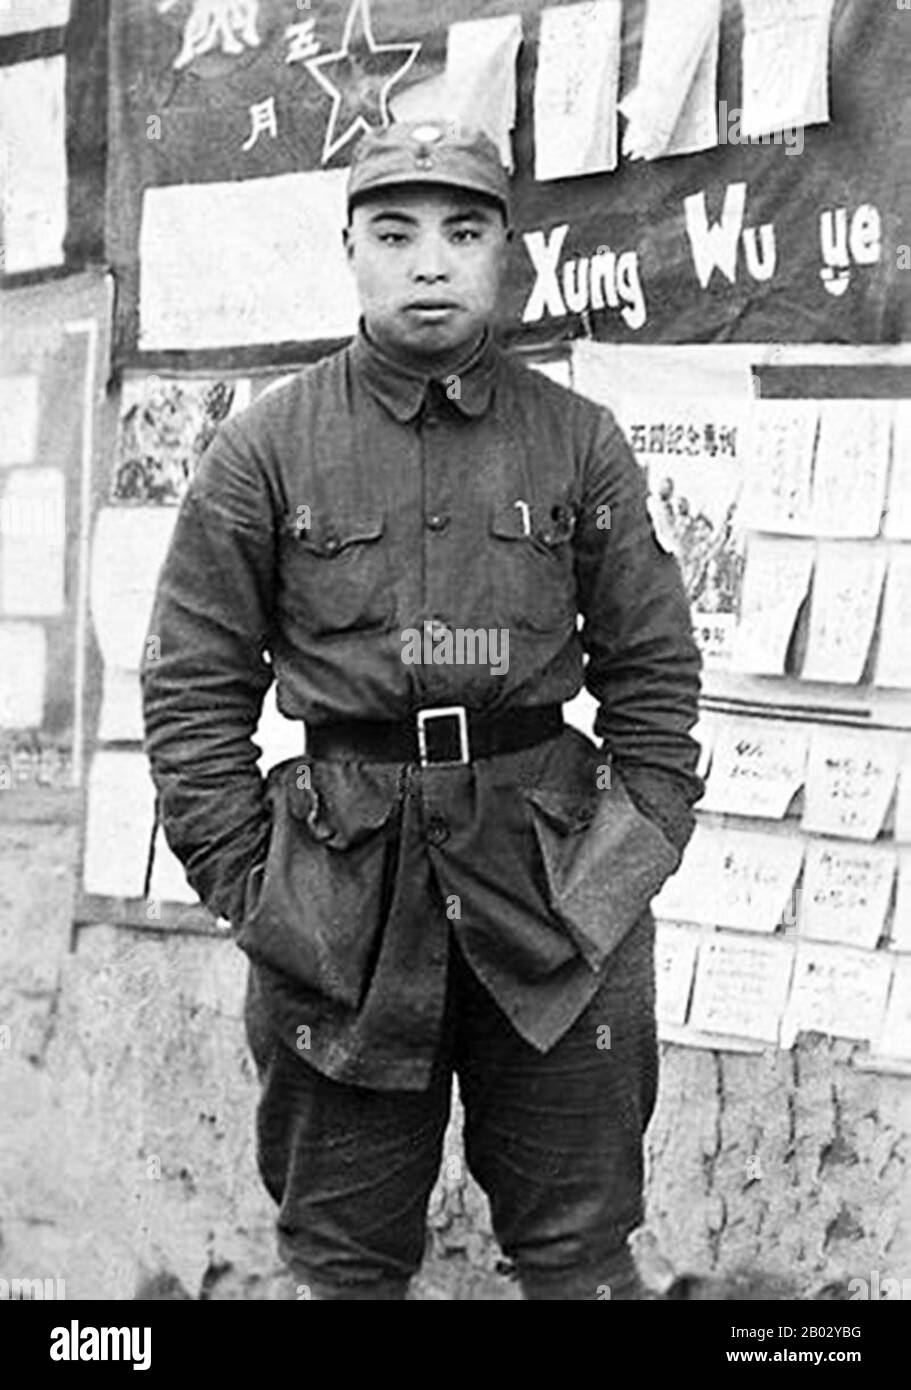 Wu Faxian (1915 - 2004) was a military and political leader of the People's Republic of China. In 1930 he became a soldier of the Chinese Workers' and Peasants' Red Army, two years later he joined the Communist Party of China. He participated in five Counter-Encirclement Campaigns, the Long March, the Battle of Pingxingguan, the Liaoshen Campaign and the Pingjin Campaign.  In 1955 he was granted the military rank of Lieutenant General. Wu was a subordinate of Lin Biao. In 1965 he became the commander of the People's Liberation Army Air Force. In 1981 he was declared guilty as a member of the L Stock Photo